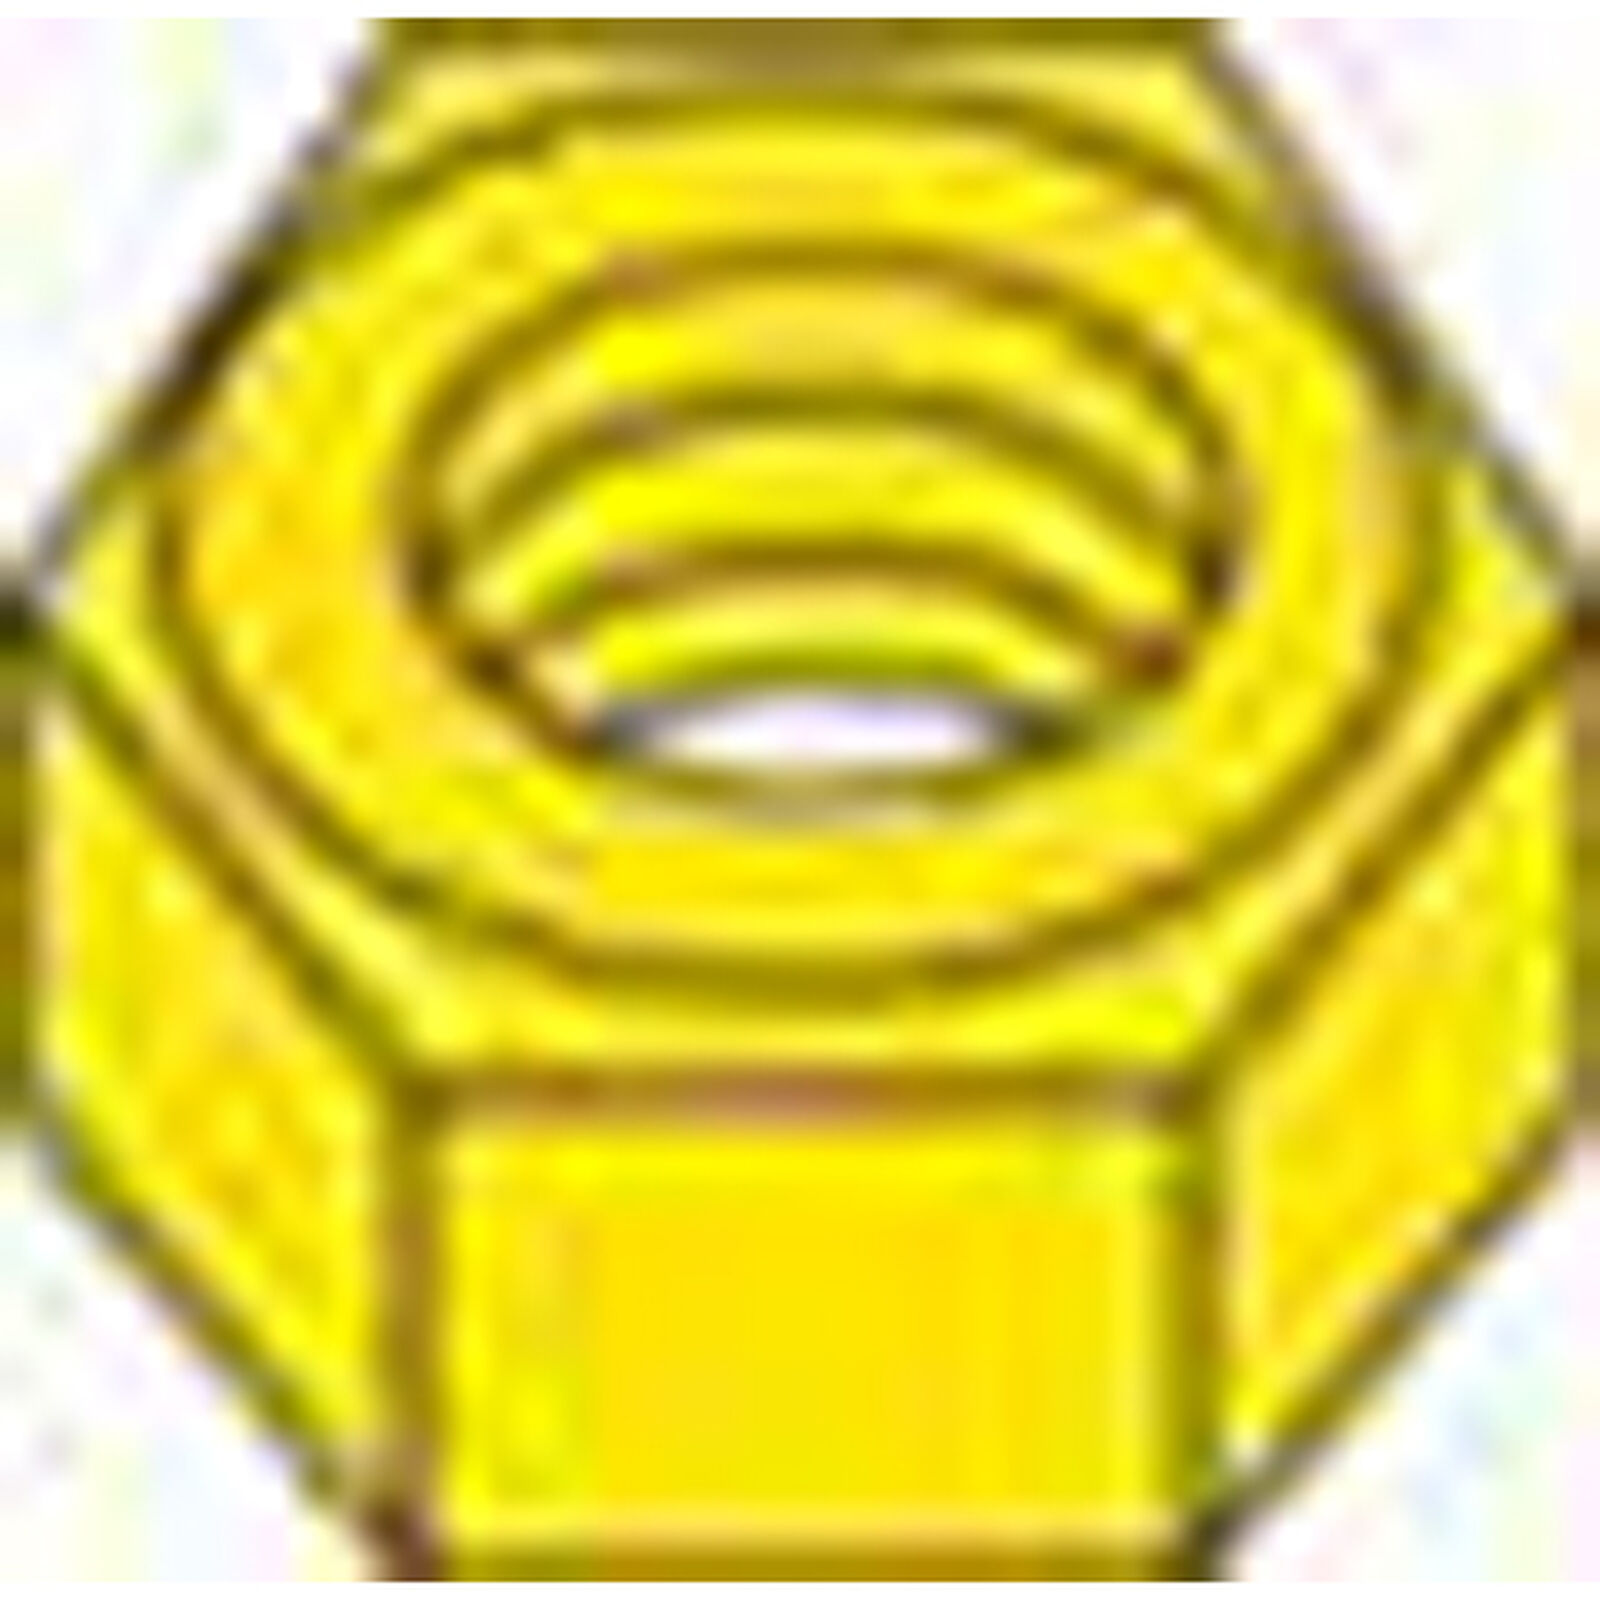 0-80 Hex Nuts (5)